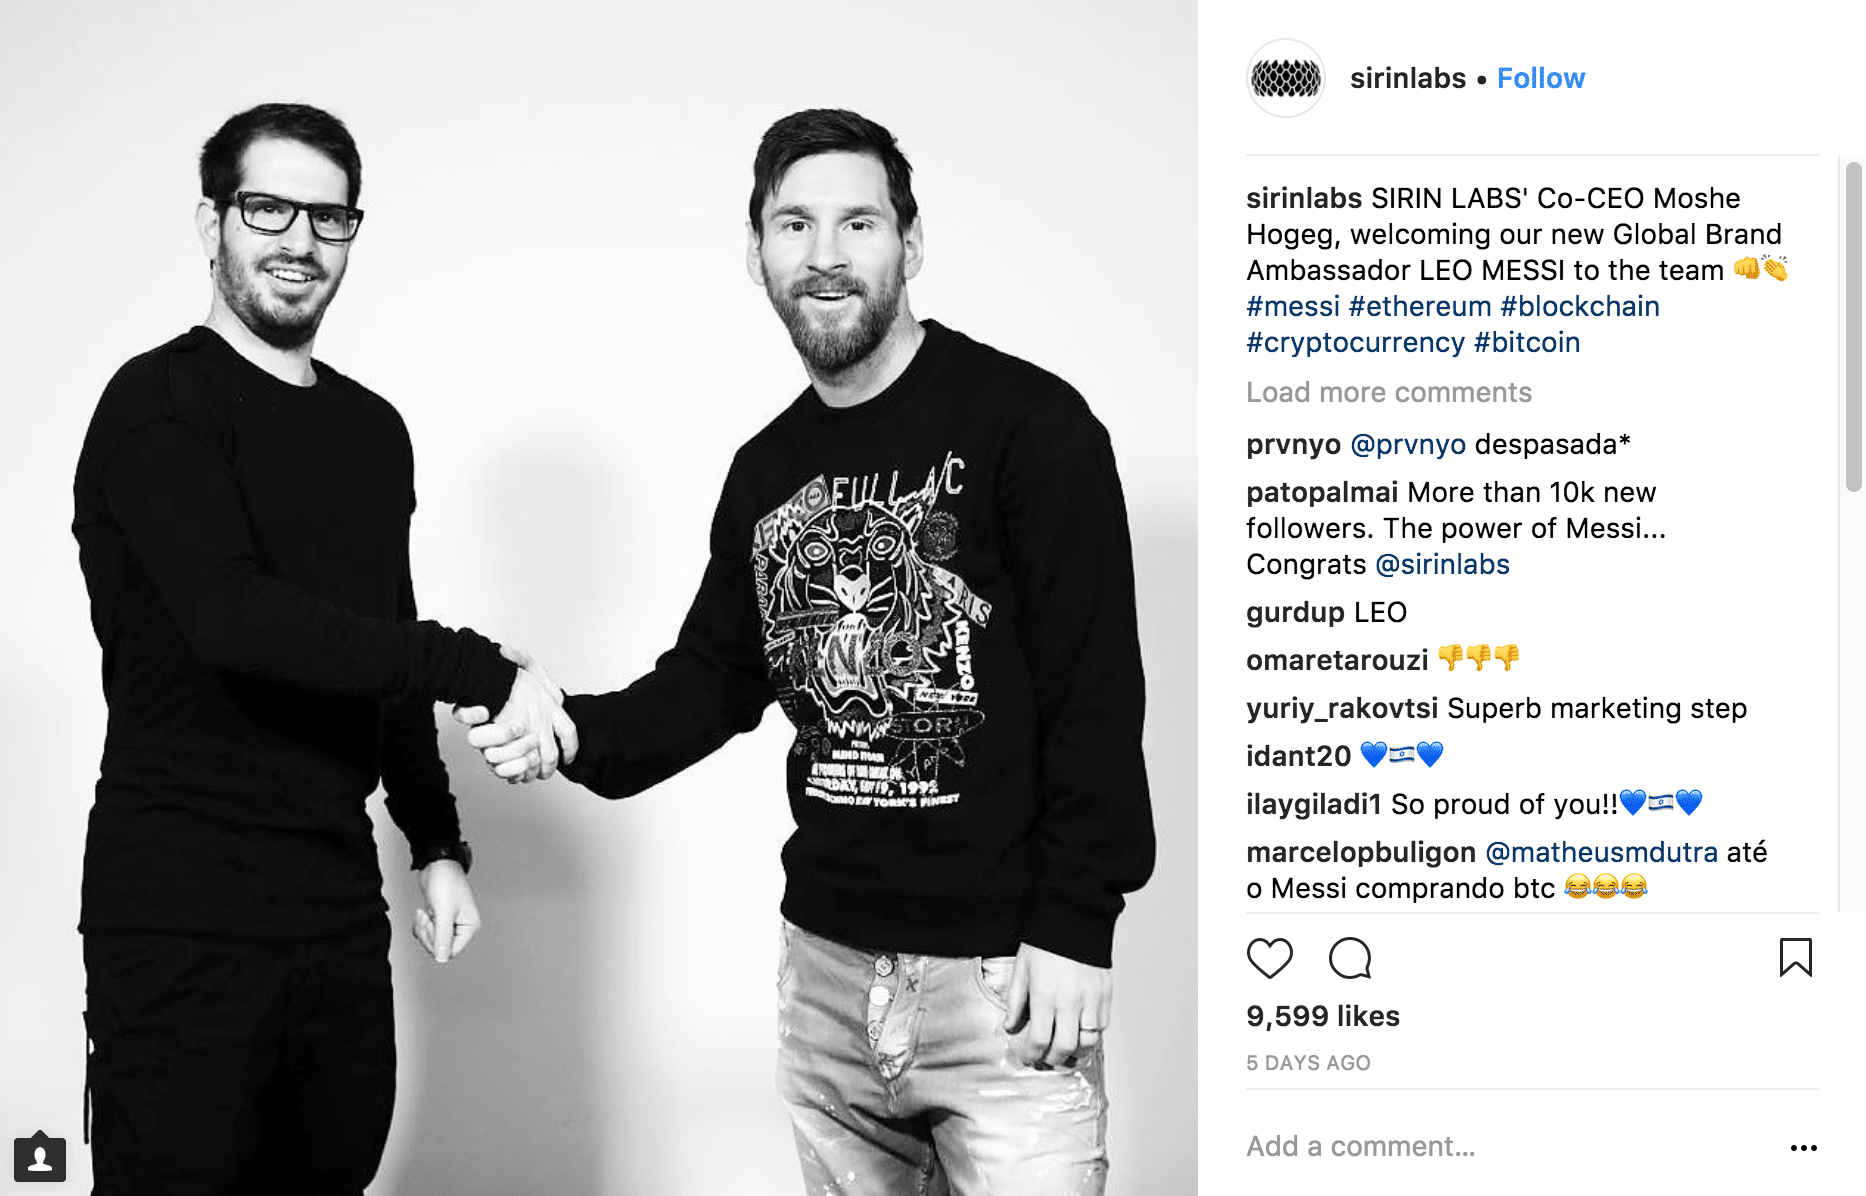 Sirin Labs Ico Scores With Their New Player: Lionel Messi